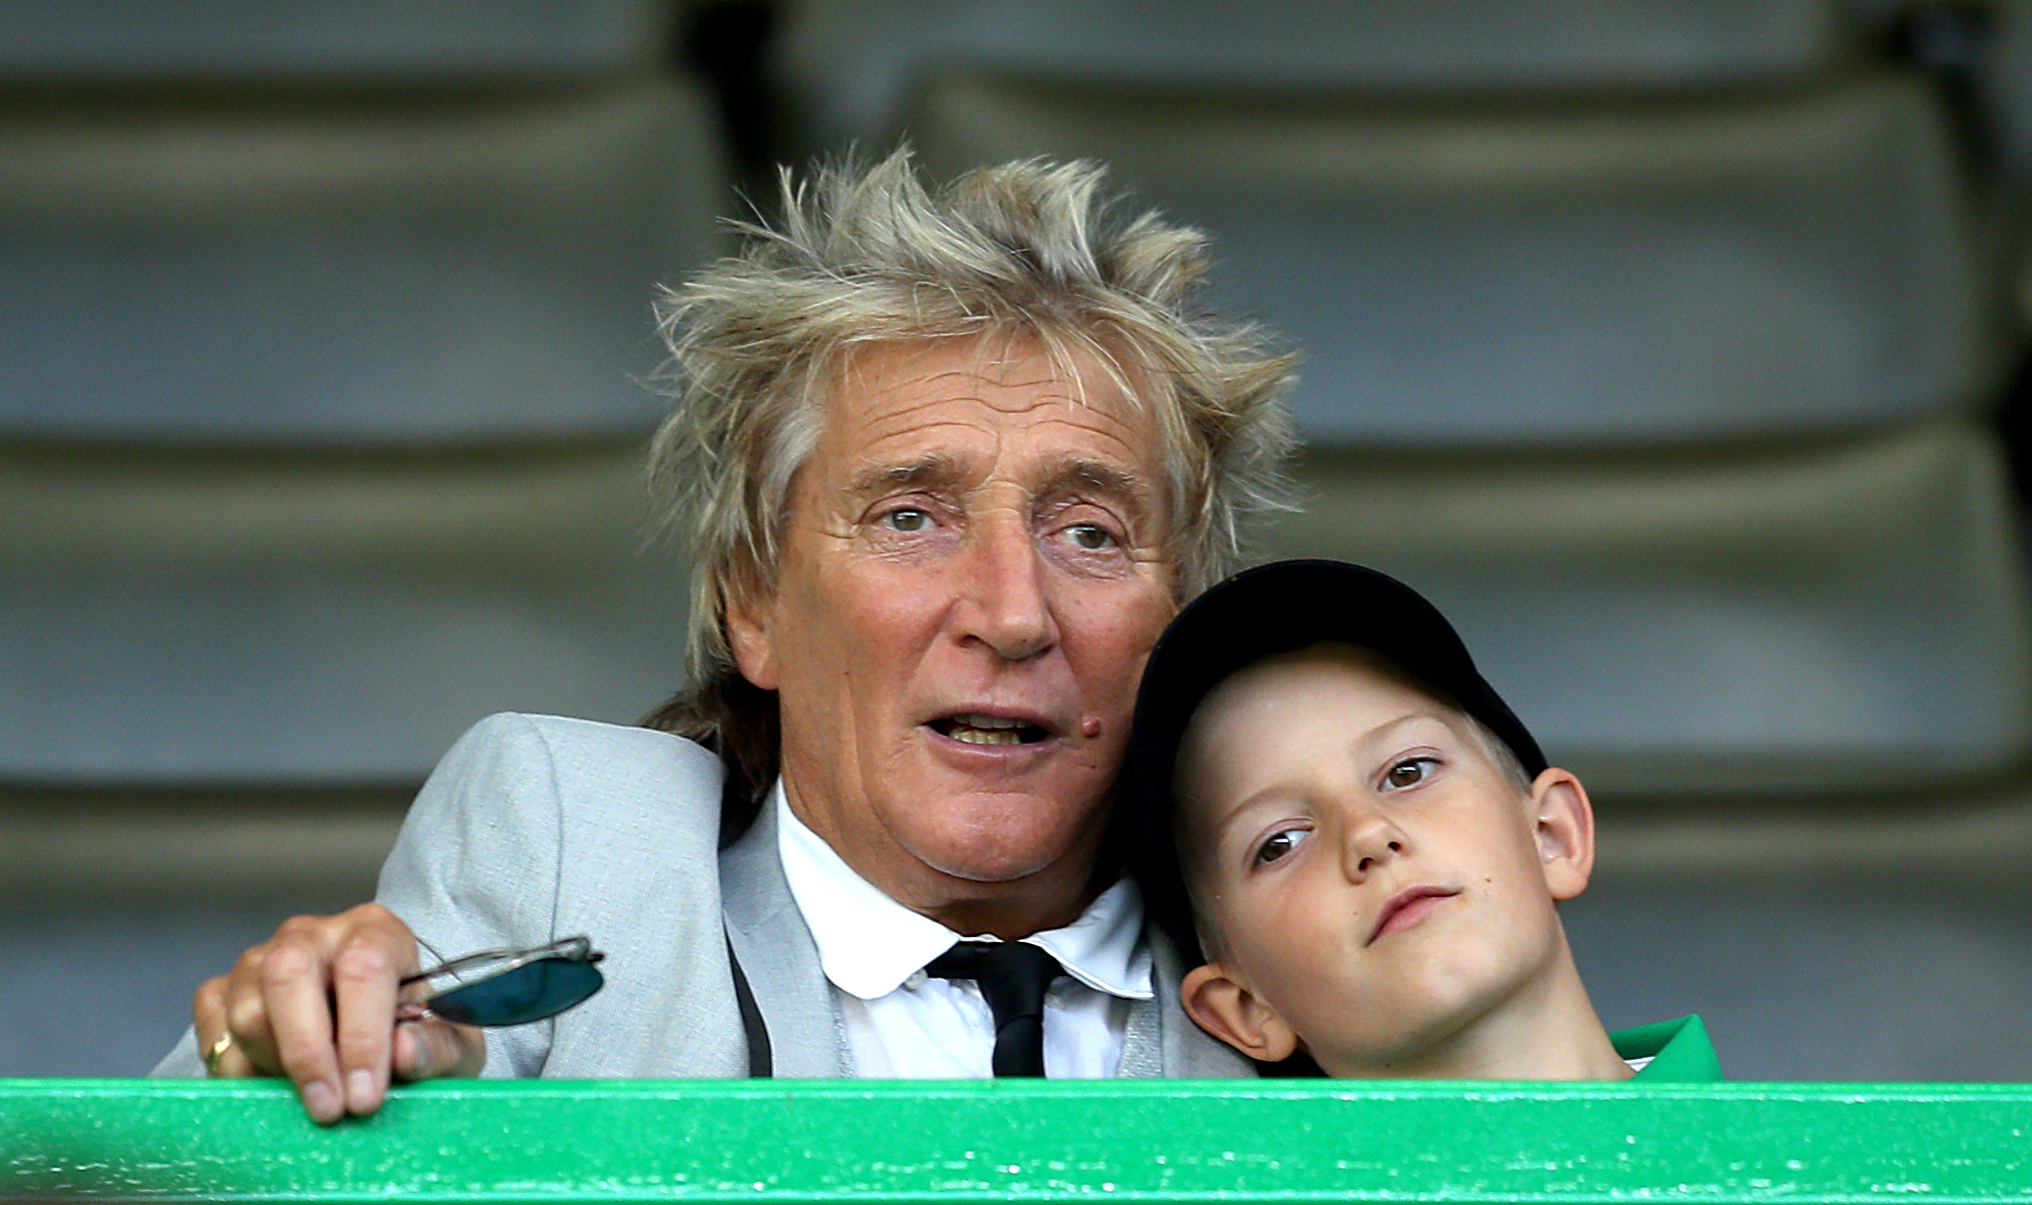 Rod and Aiden Stewart during the UEFA Champions League third qualifying round second leg match in Glasgow, Scotland, on August 13, 2019. | Source: Getty Images